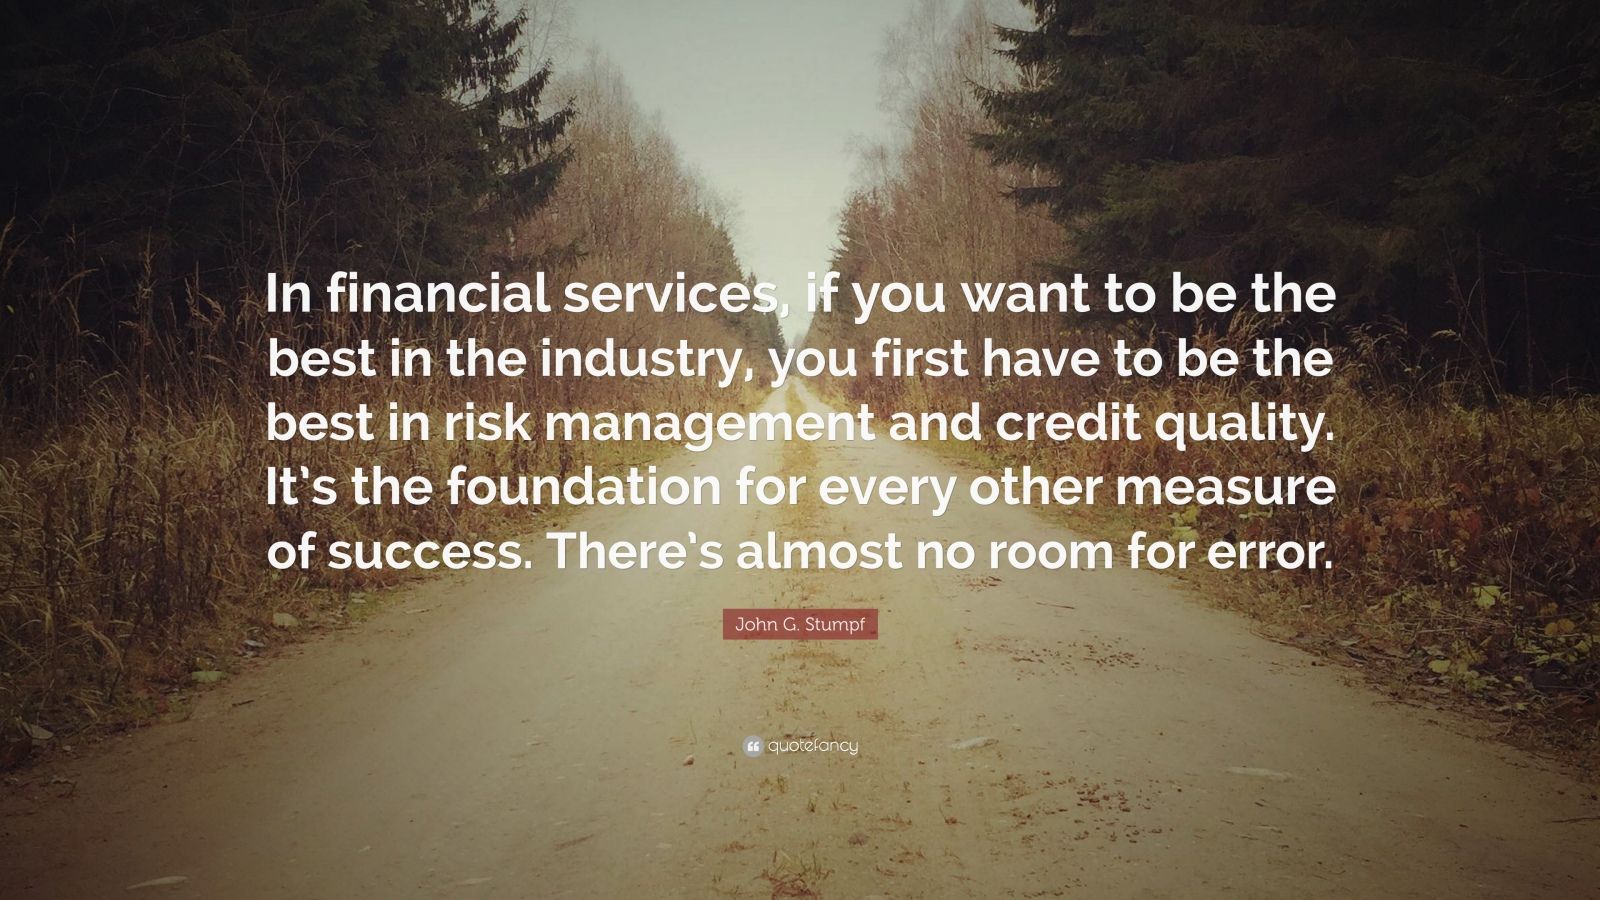 John G. Stumpf Quote: “In financial services, if you want to be the